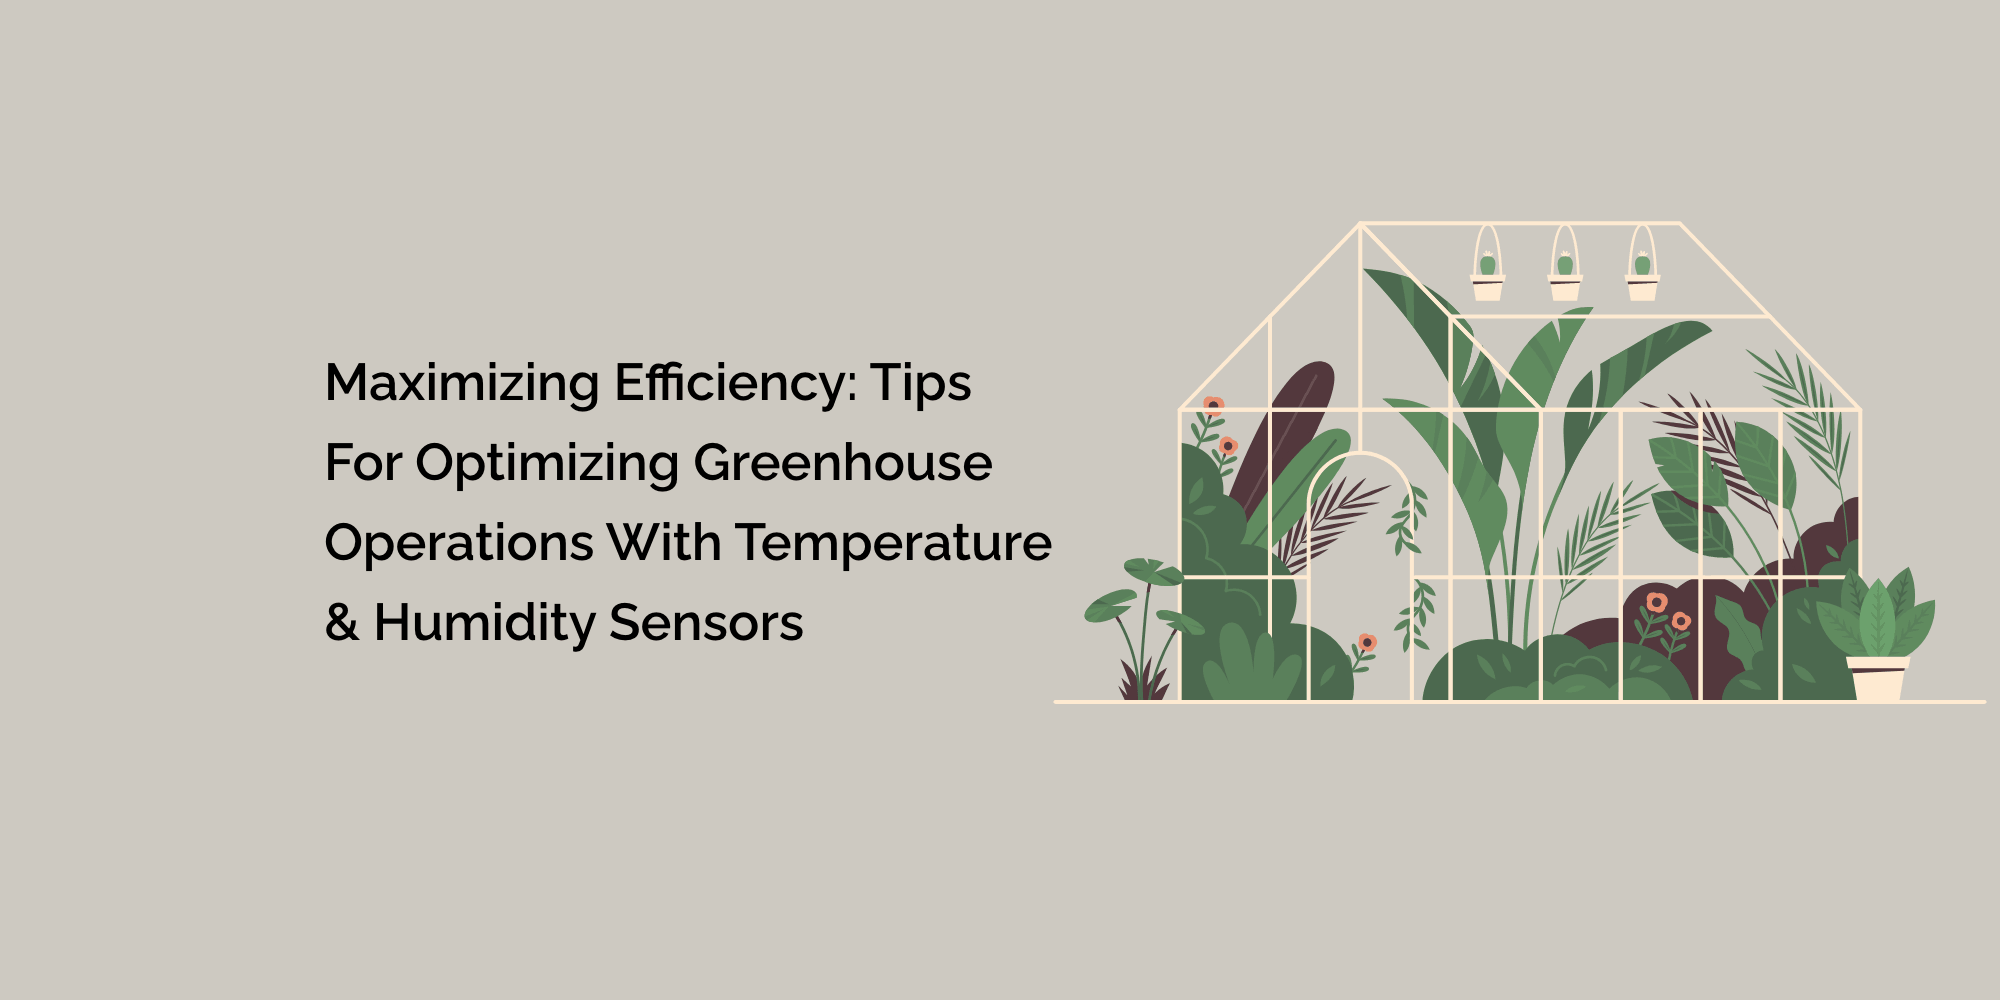 Maximizing Efficiency: Tips for Optimizing Greenhouse Operations with Temperature and Humidity Sensors